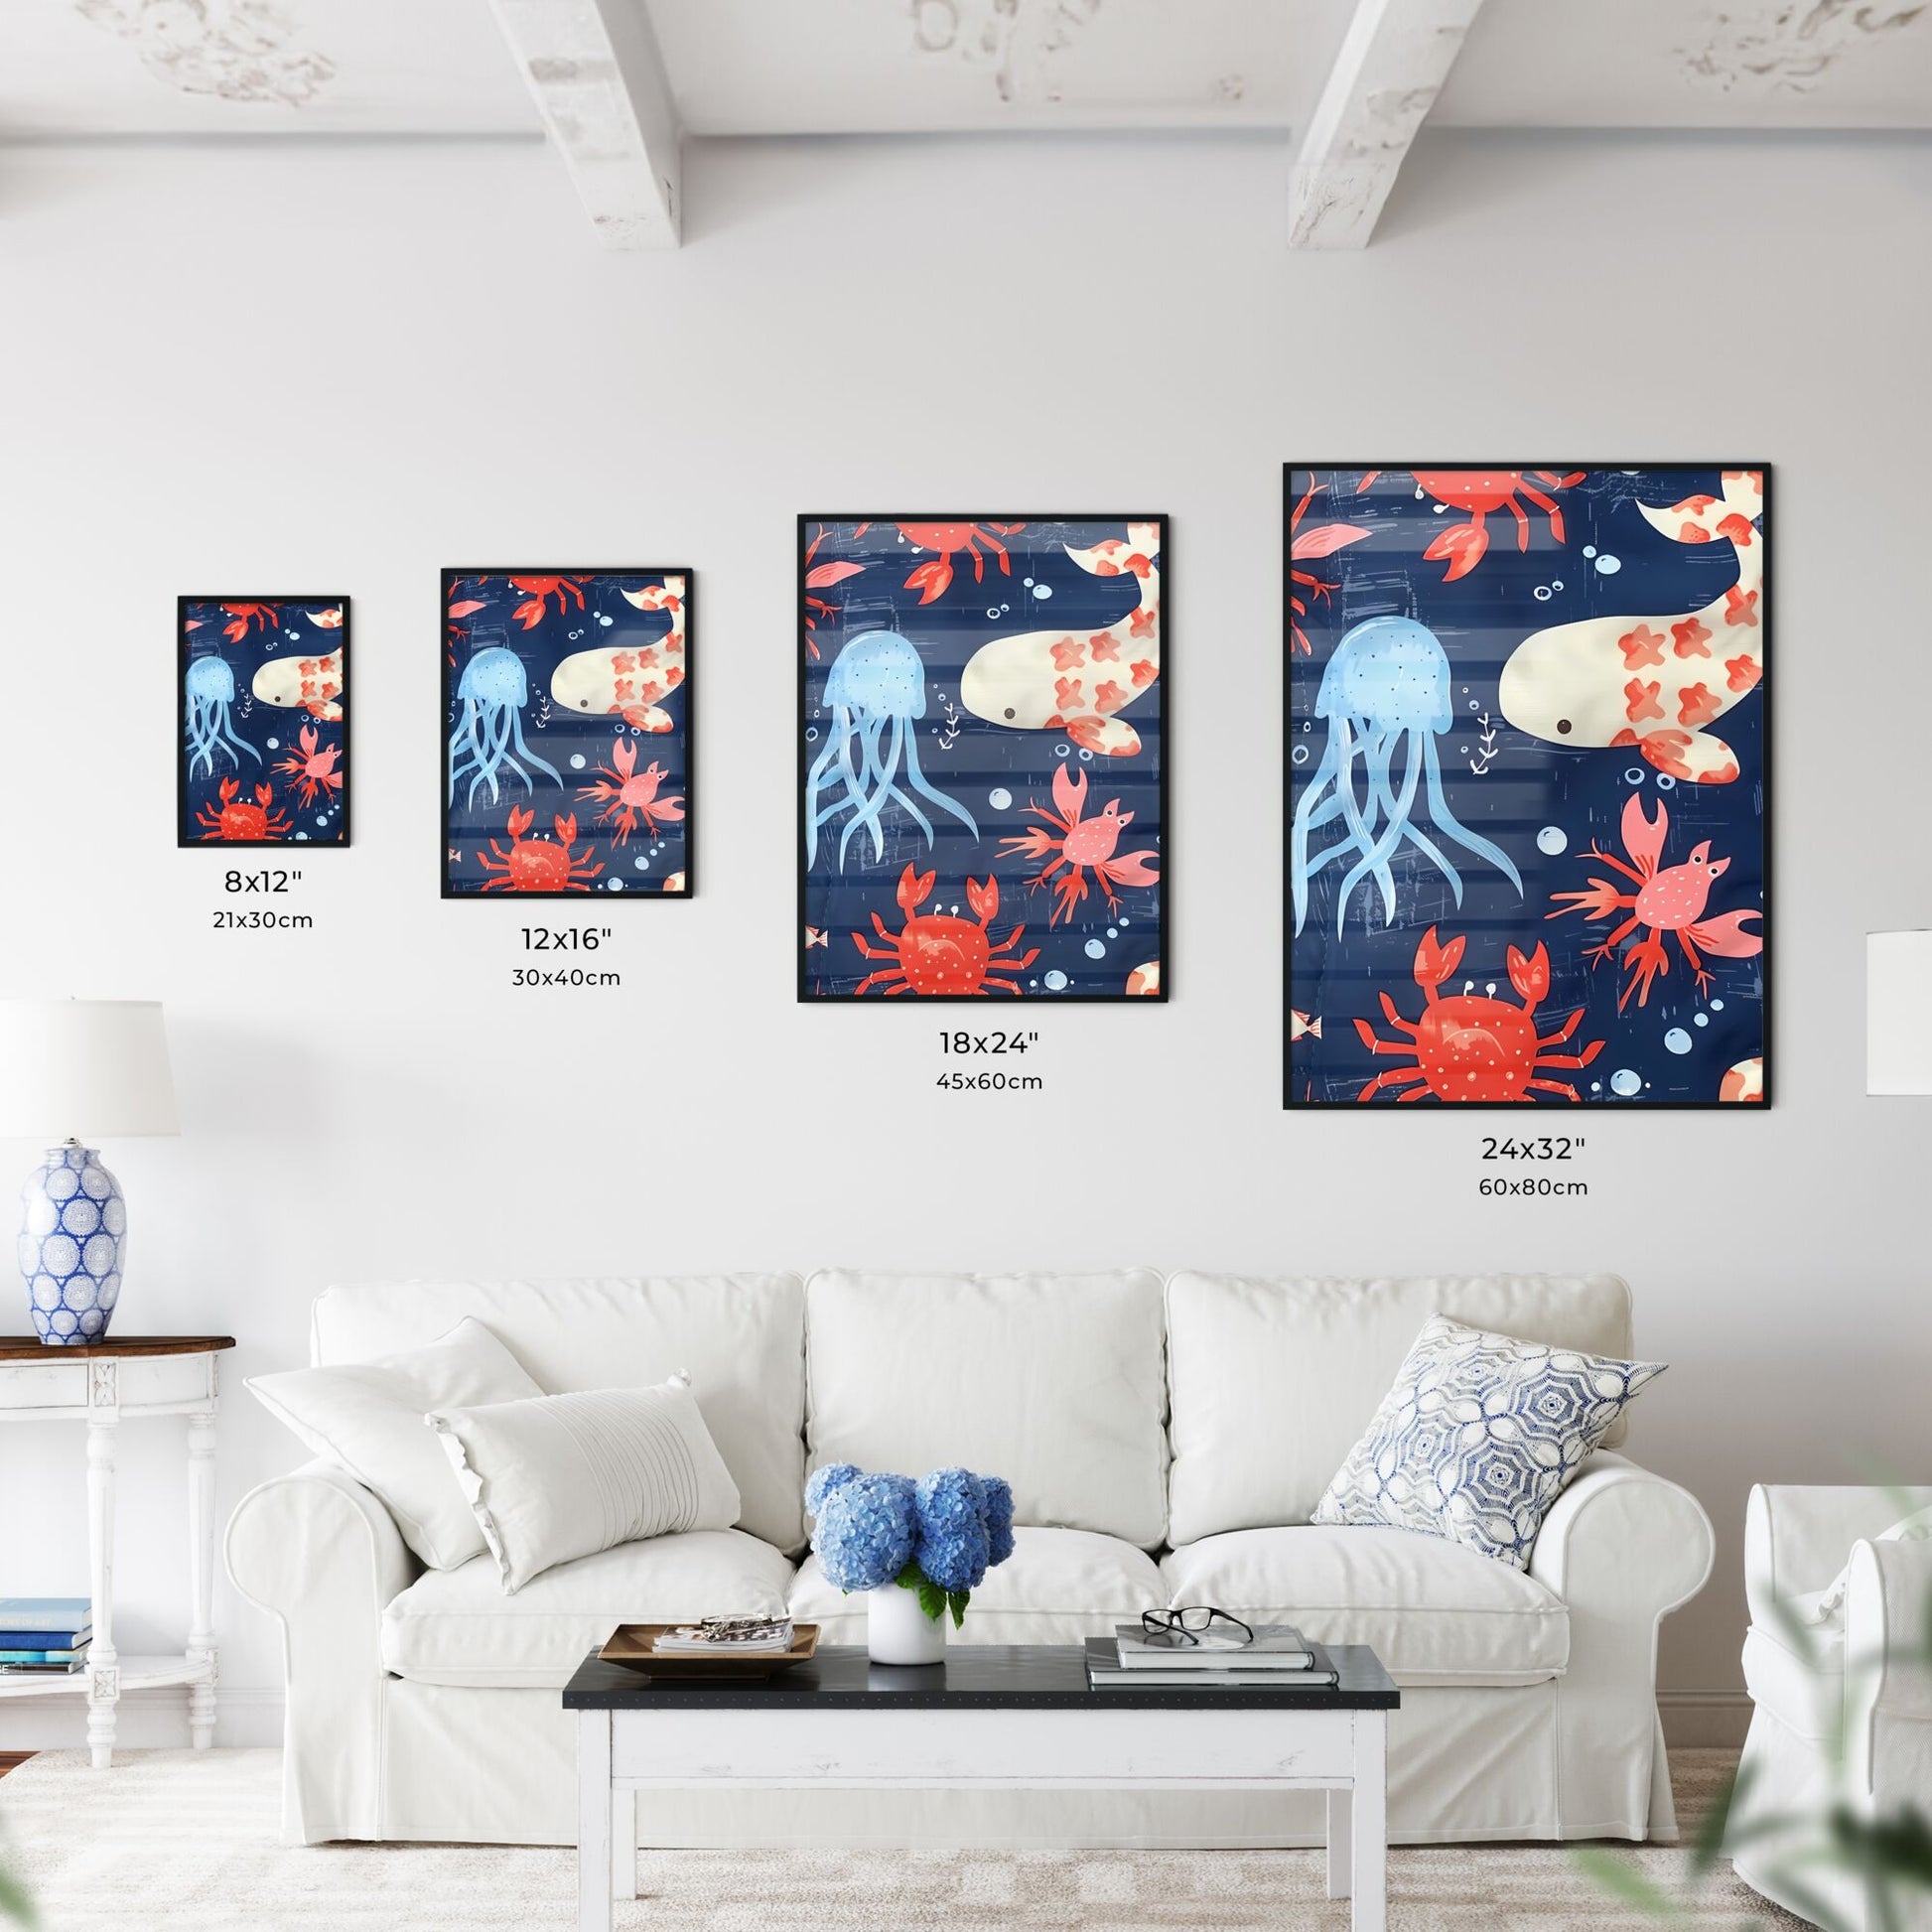 Vibrant Turquoise Marine Life Fabric Print: Playful Red and White Fish and Crabs on Blue Canvas with White Jellyfish Patterns Default Title